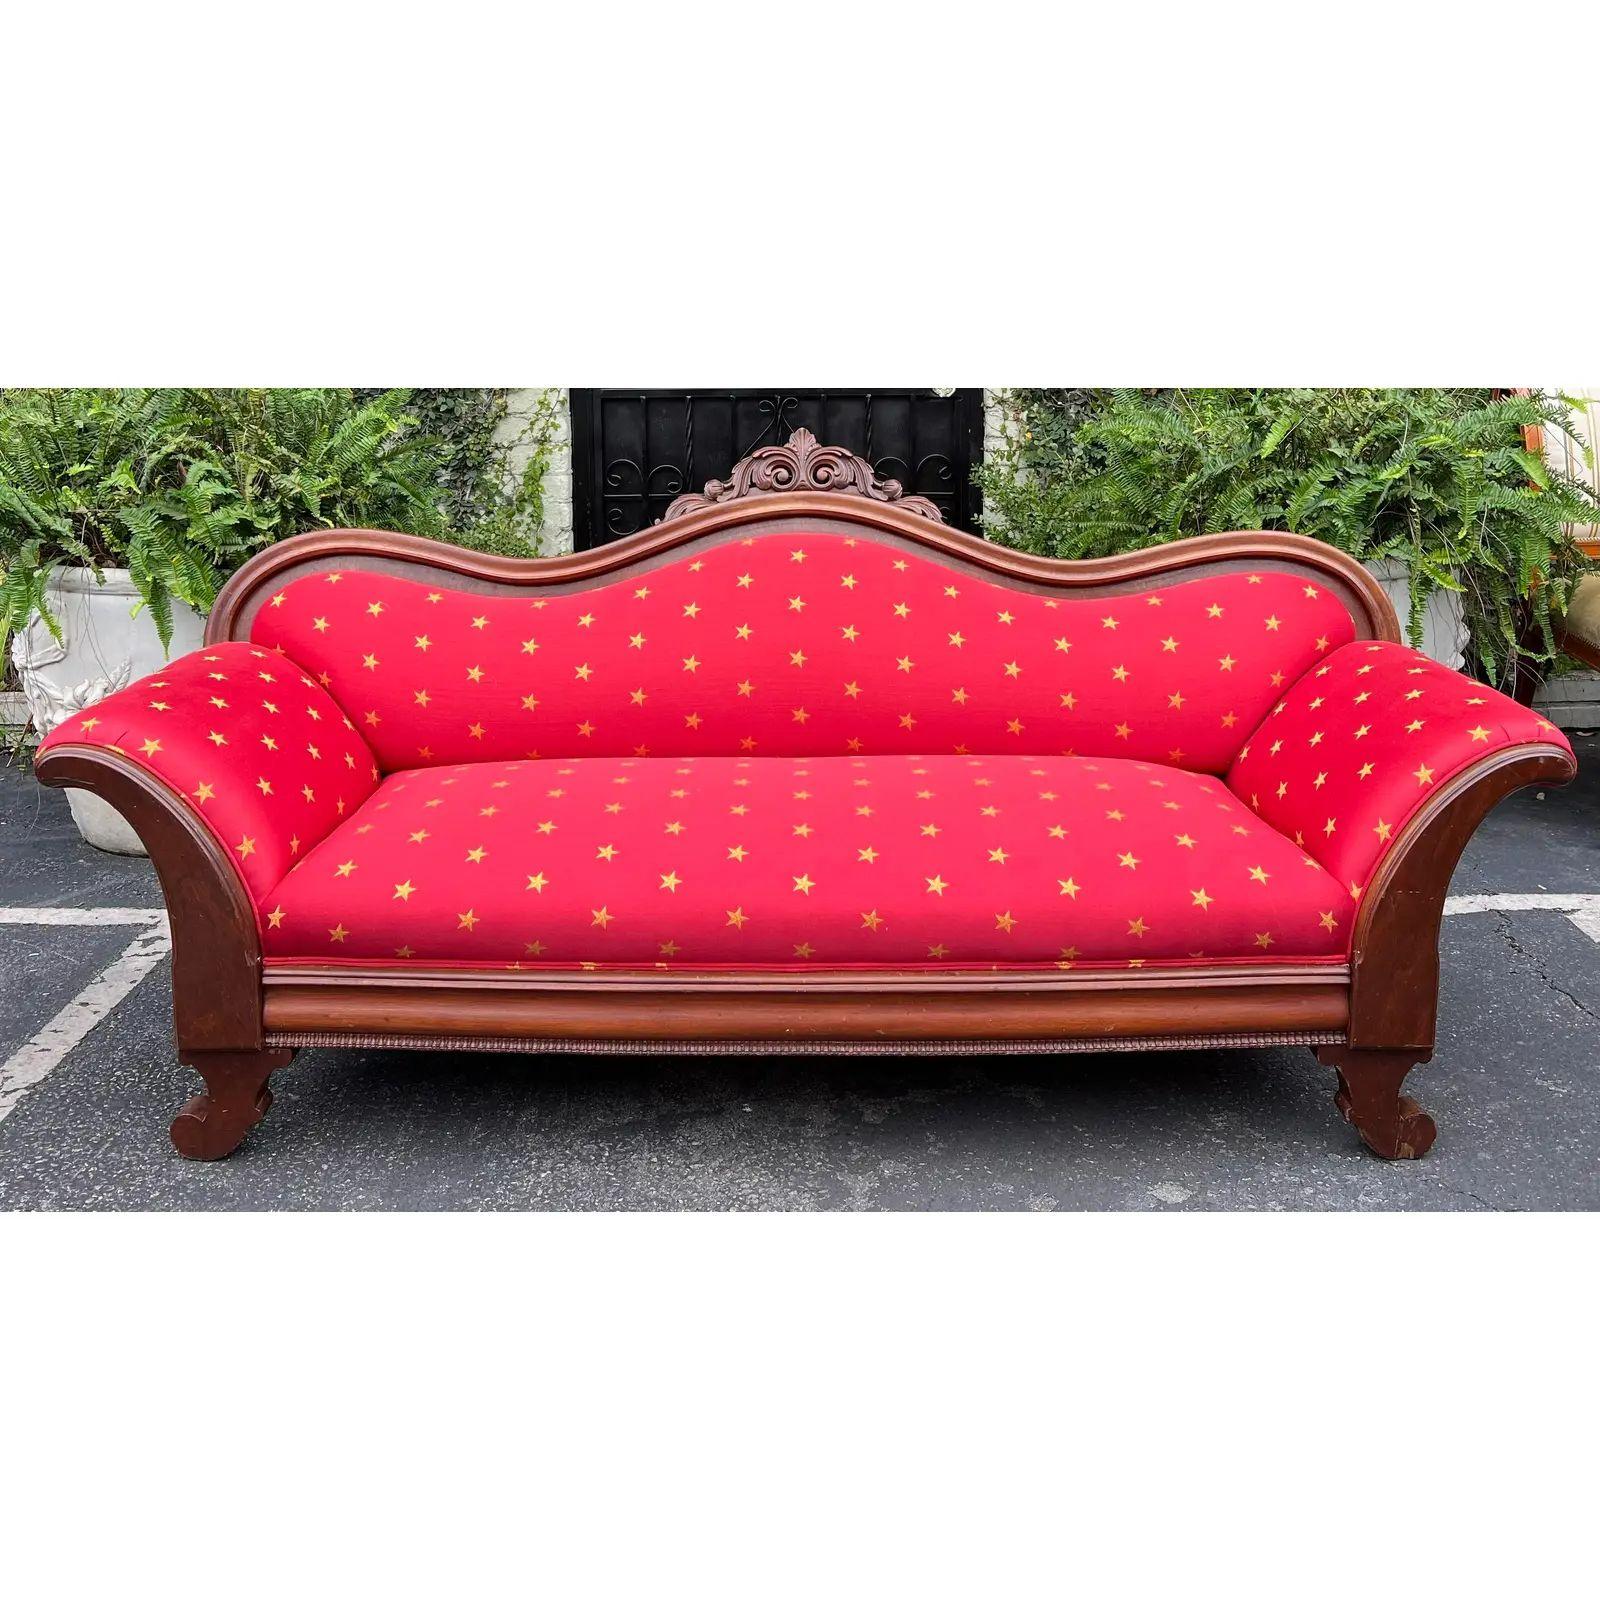 Antique Empire Sofa with Red & Gold Clarence House Fabric, Mid-19th Century 2